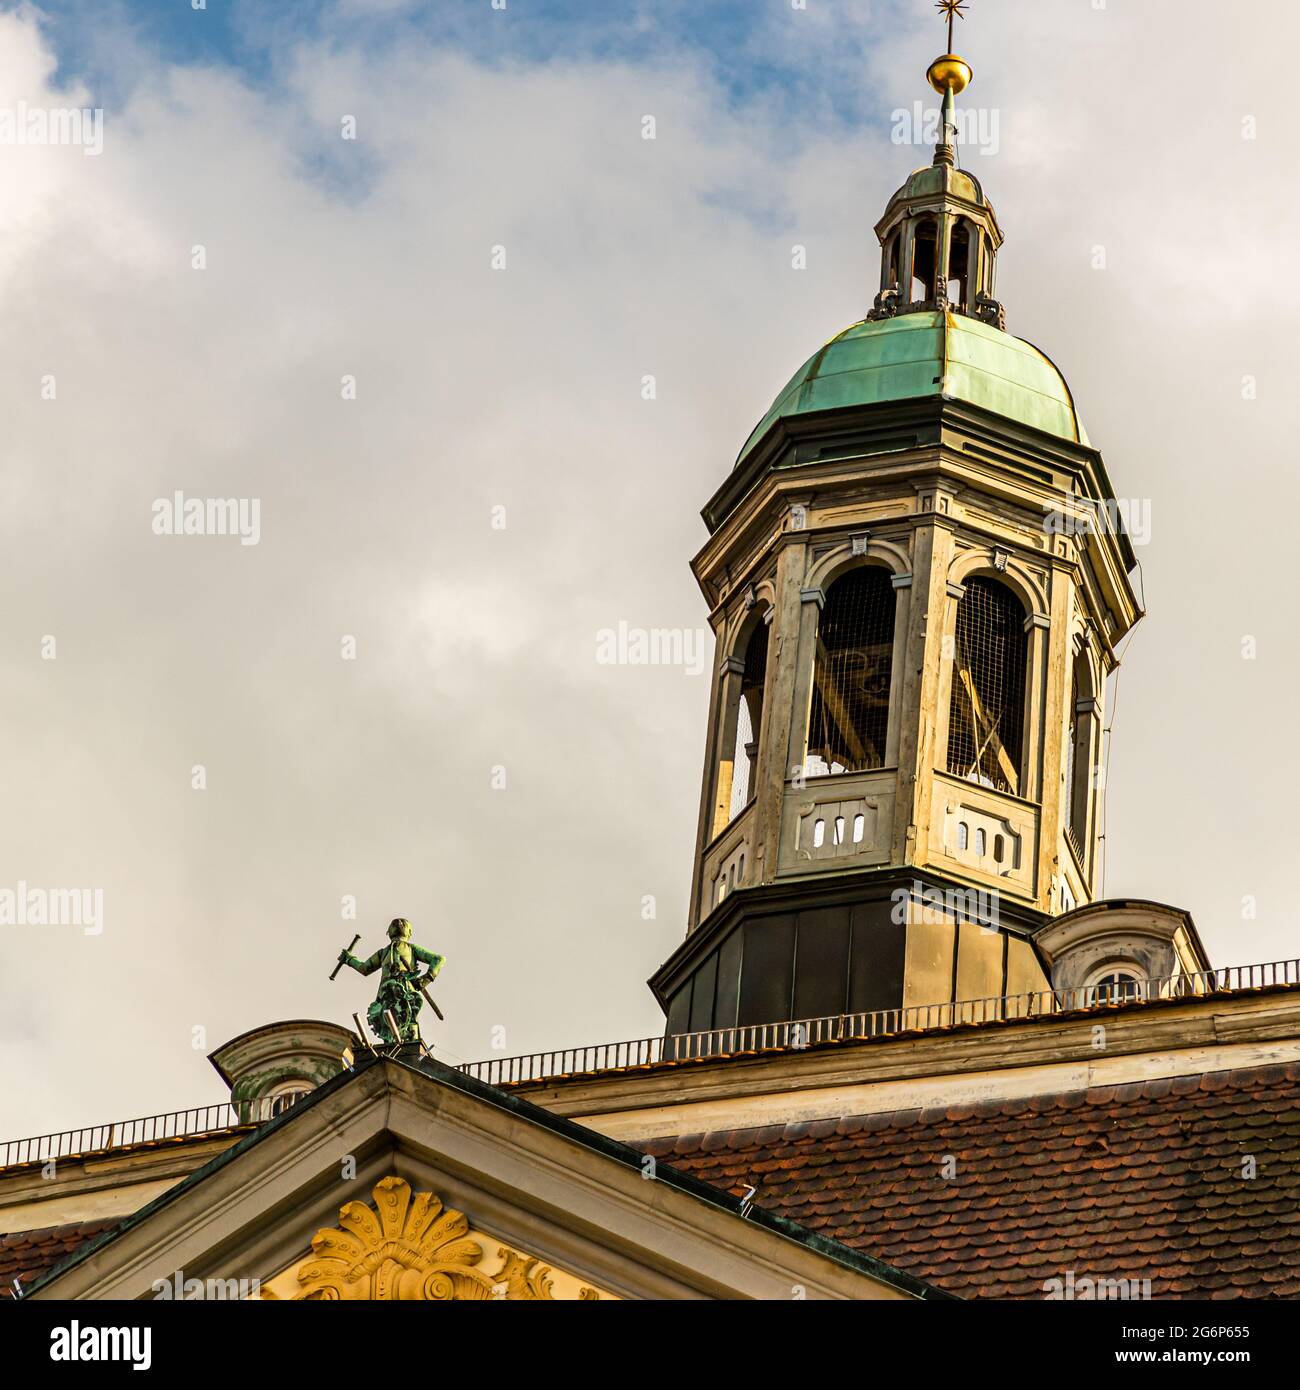 The figure of St. Moritz on the roof of the Town Hall of Coburg, Germany Stock Photo